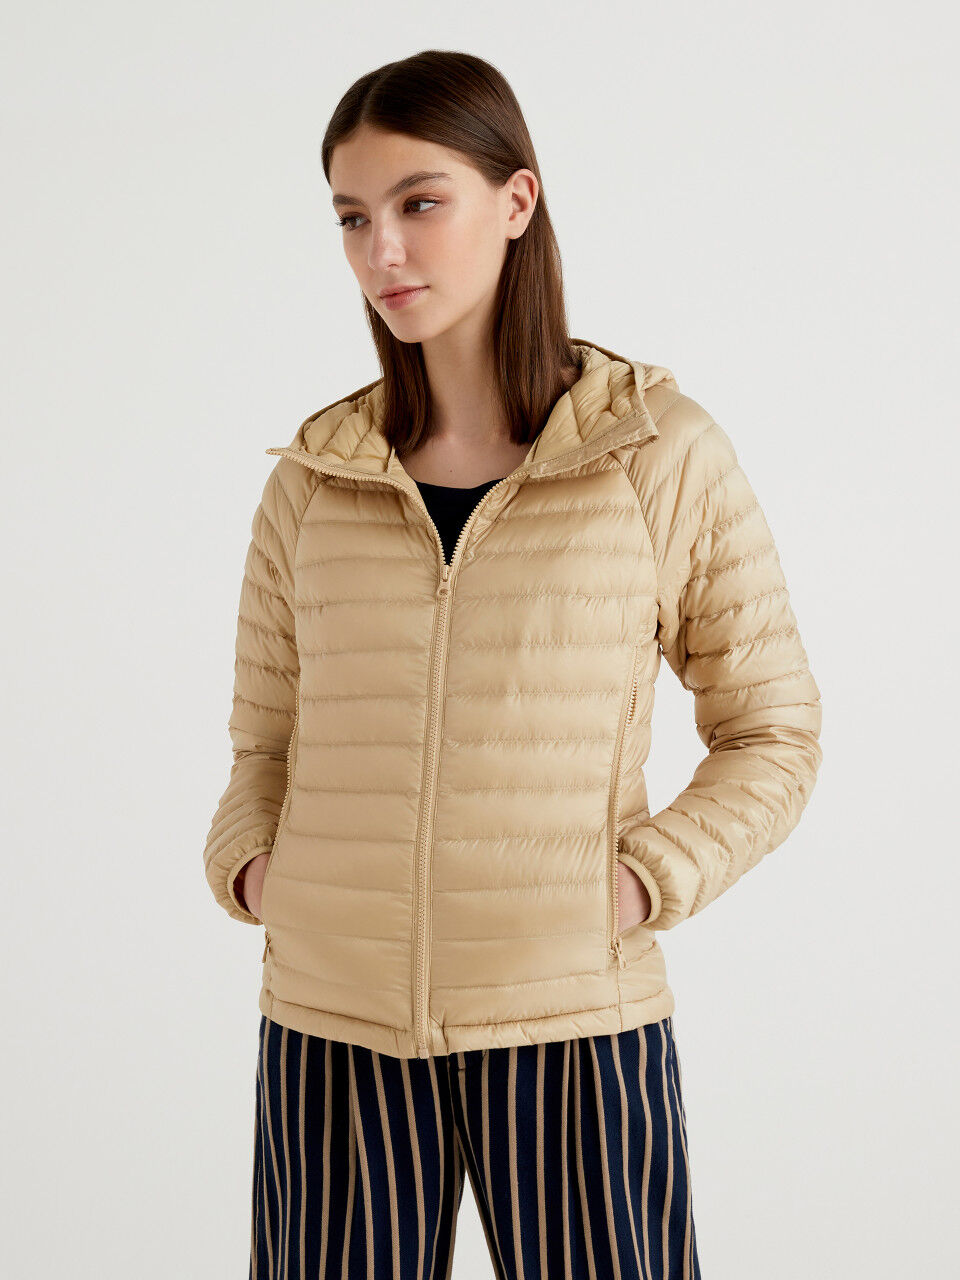 Ultra Light Womens Packable Winter Coat With White Duck Fur Down Hood  Casual Slim Fit Parka Coat In 6XL And 7XL Sizes 201112 From Mu03, $18.48 |  DHgate.Com